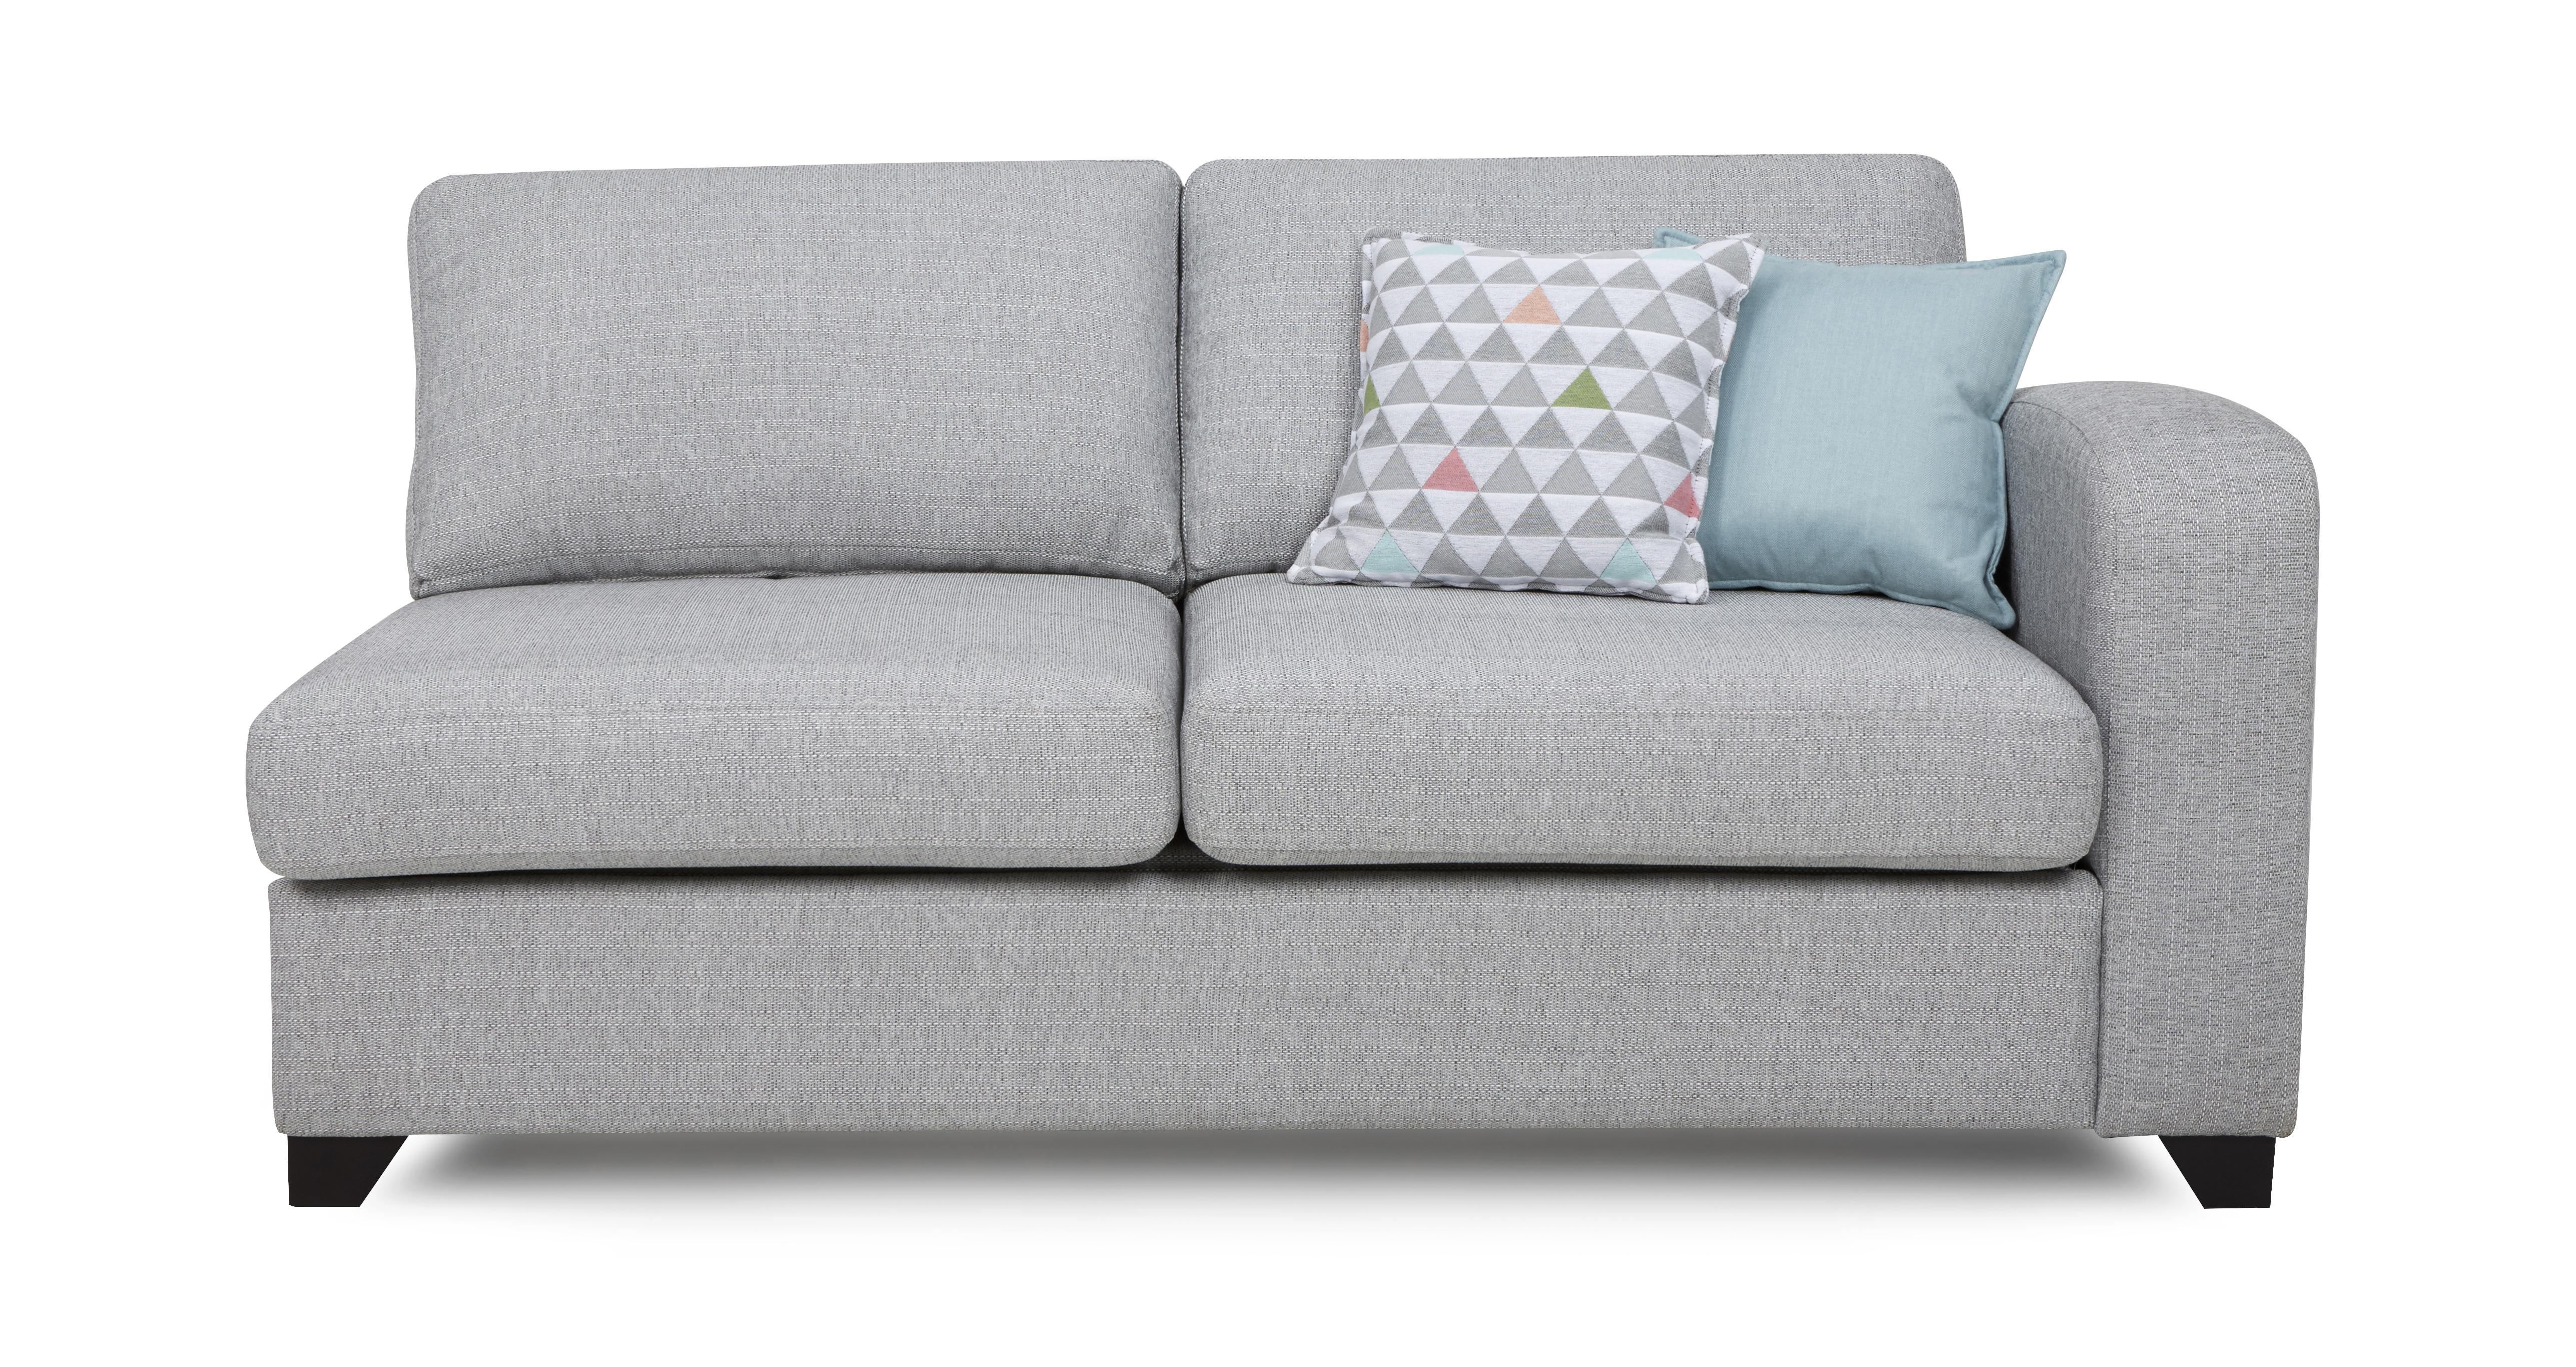 dfs lydia sofa bed review